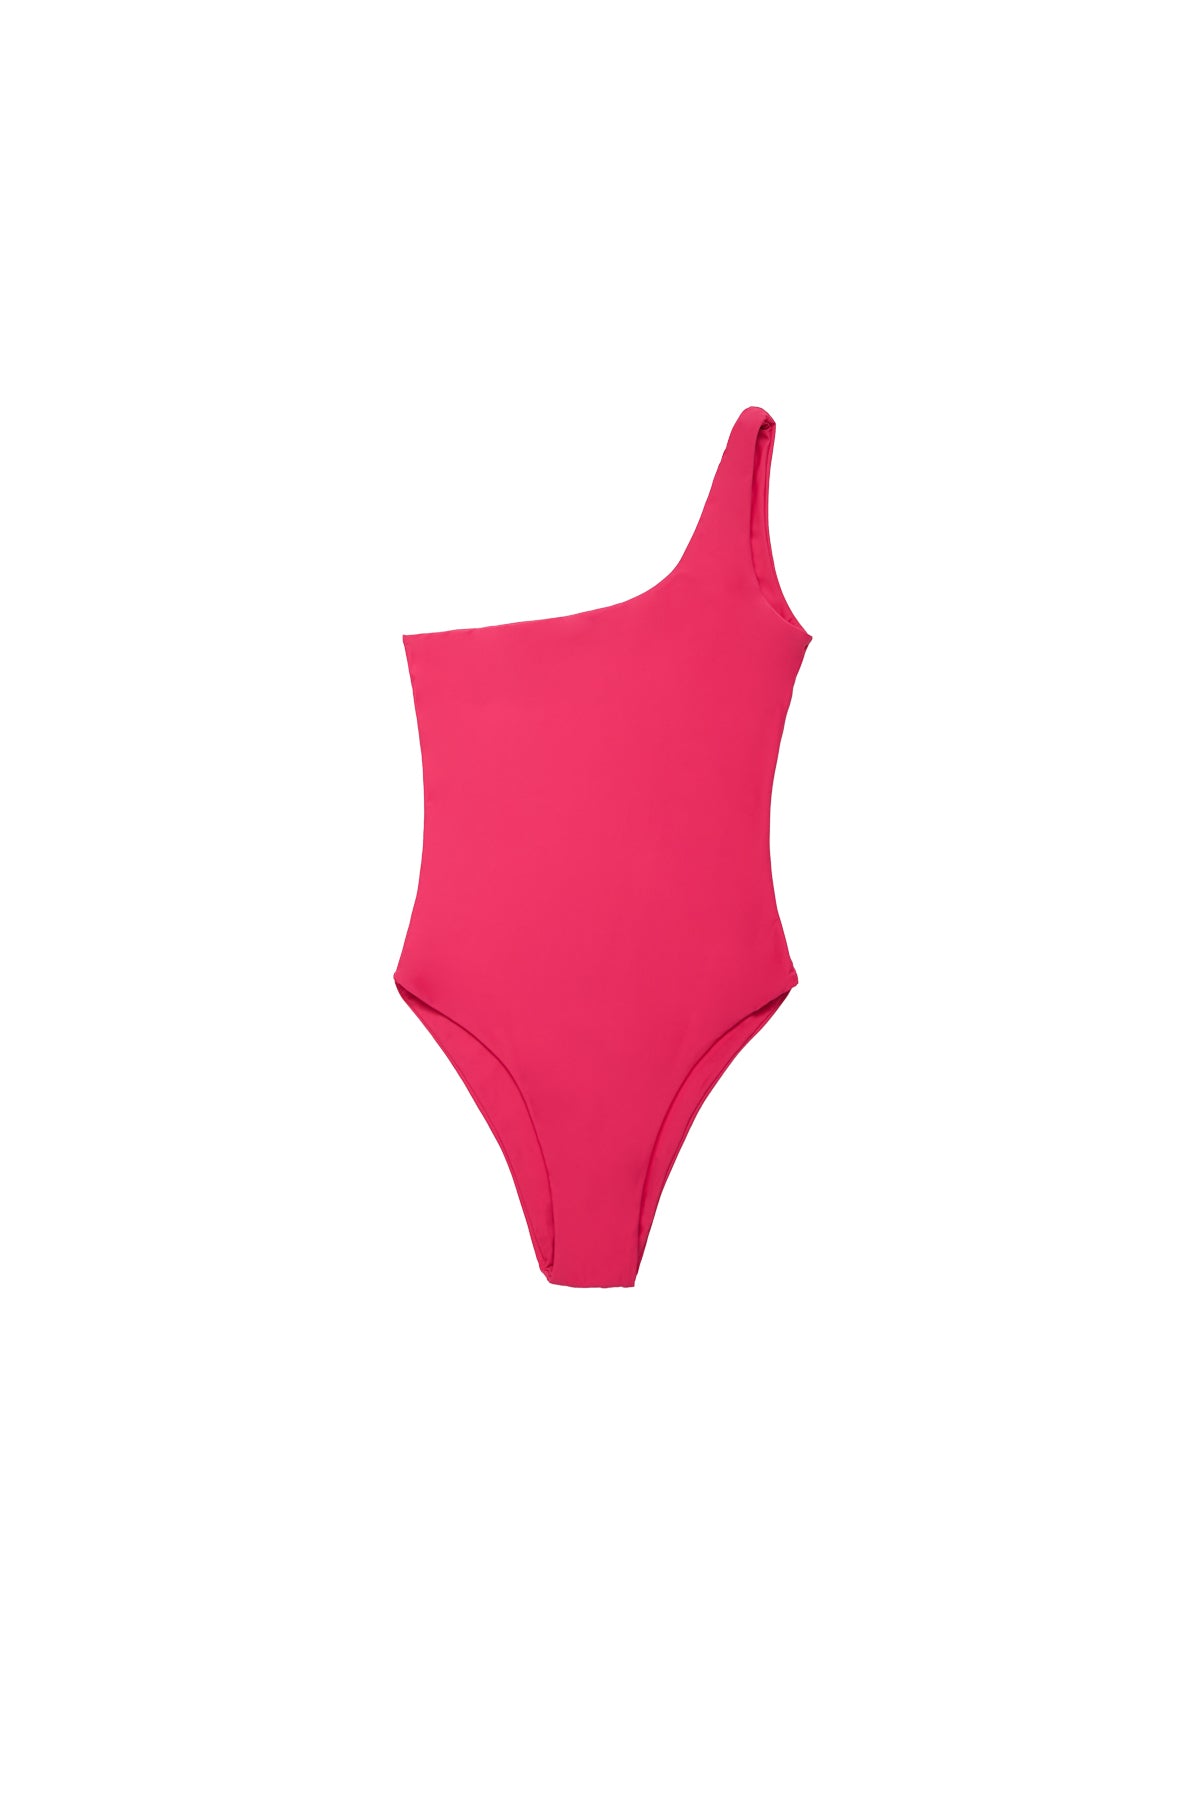 The Timeless One Piece Pink